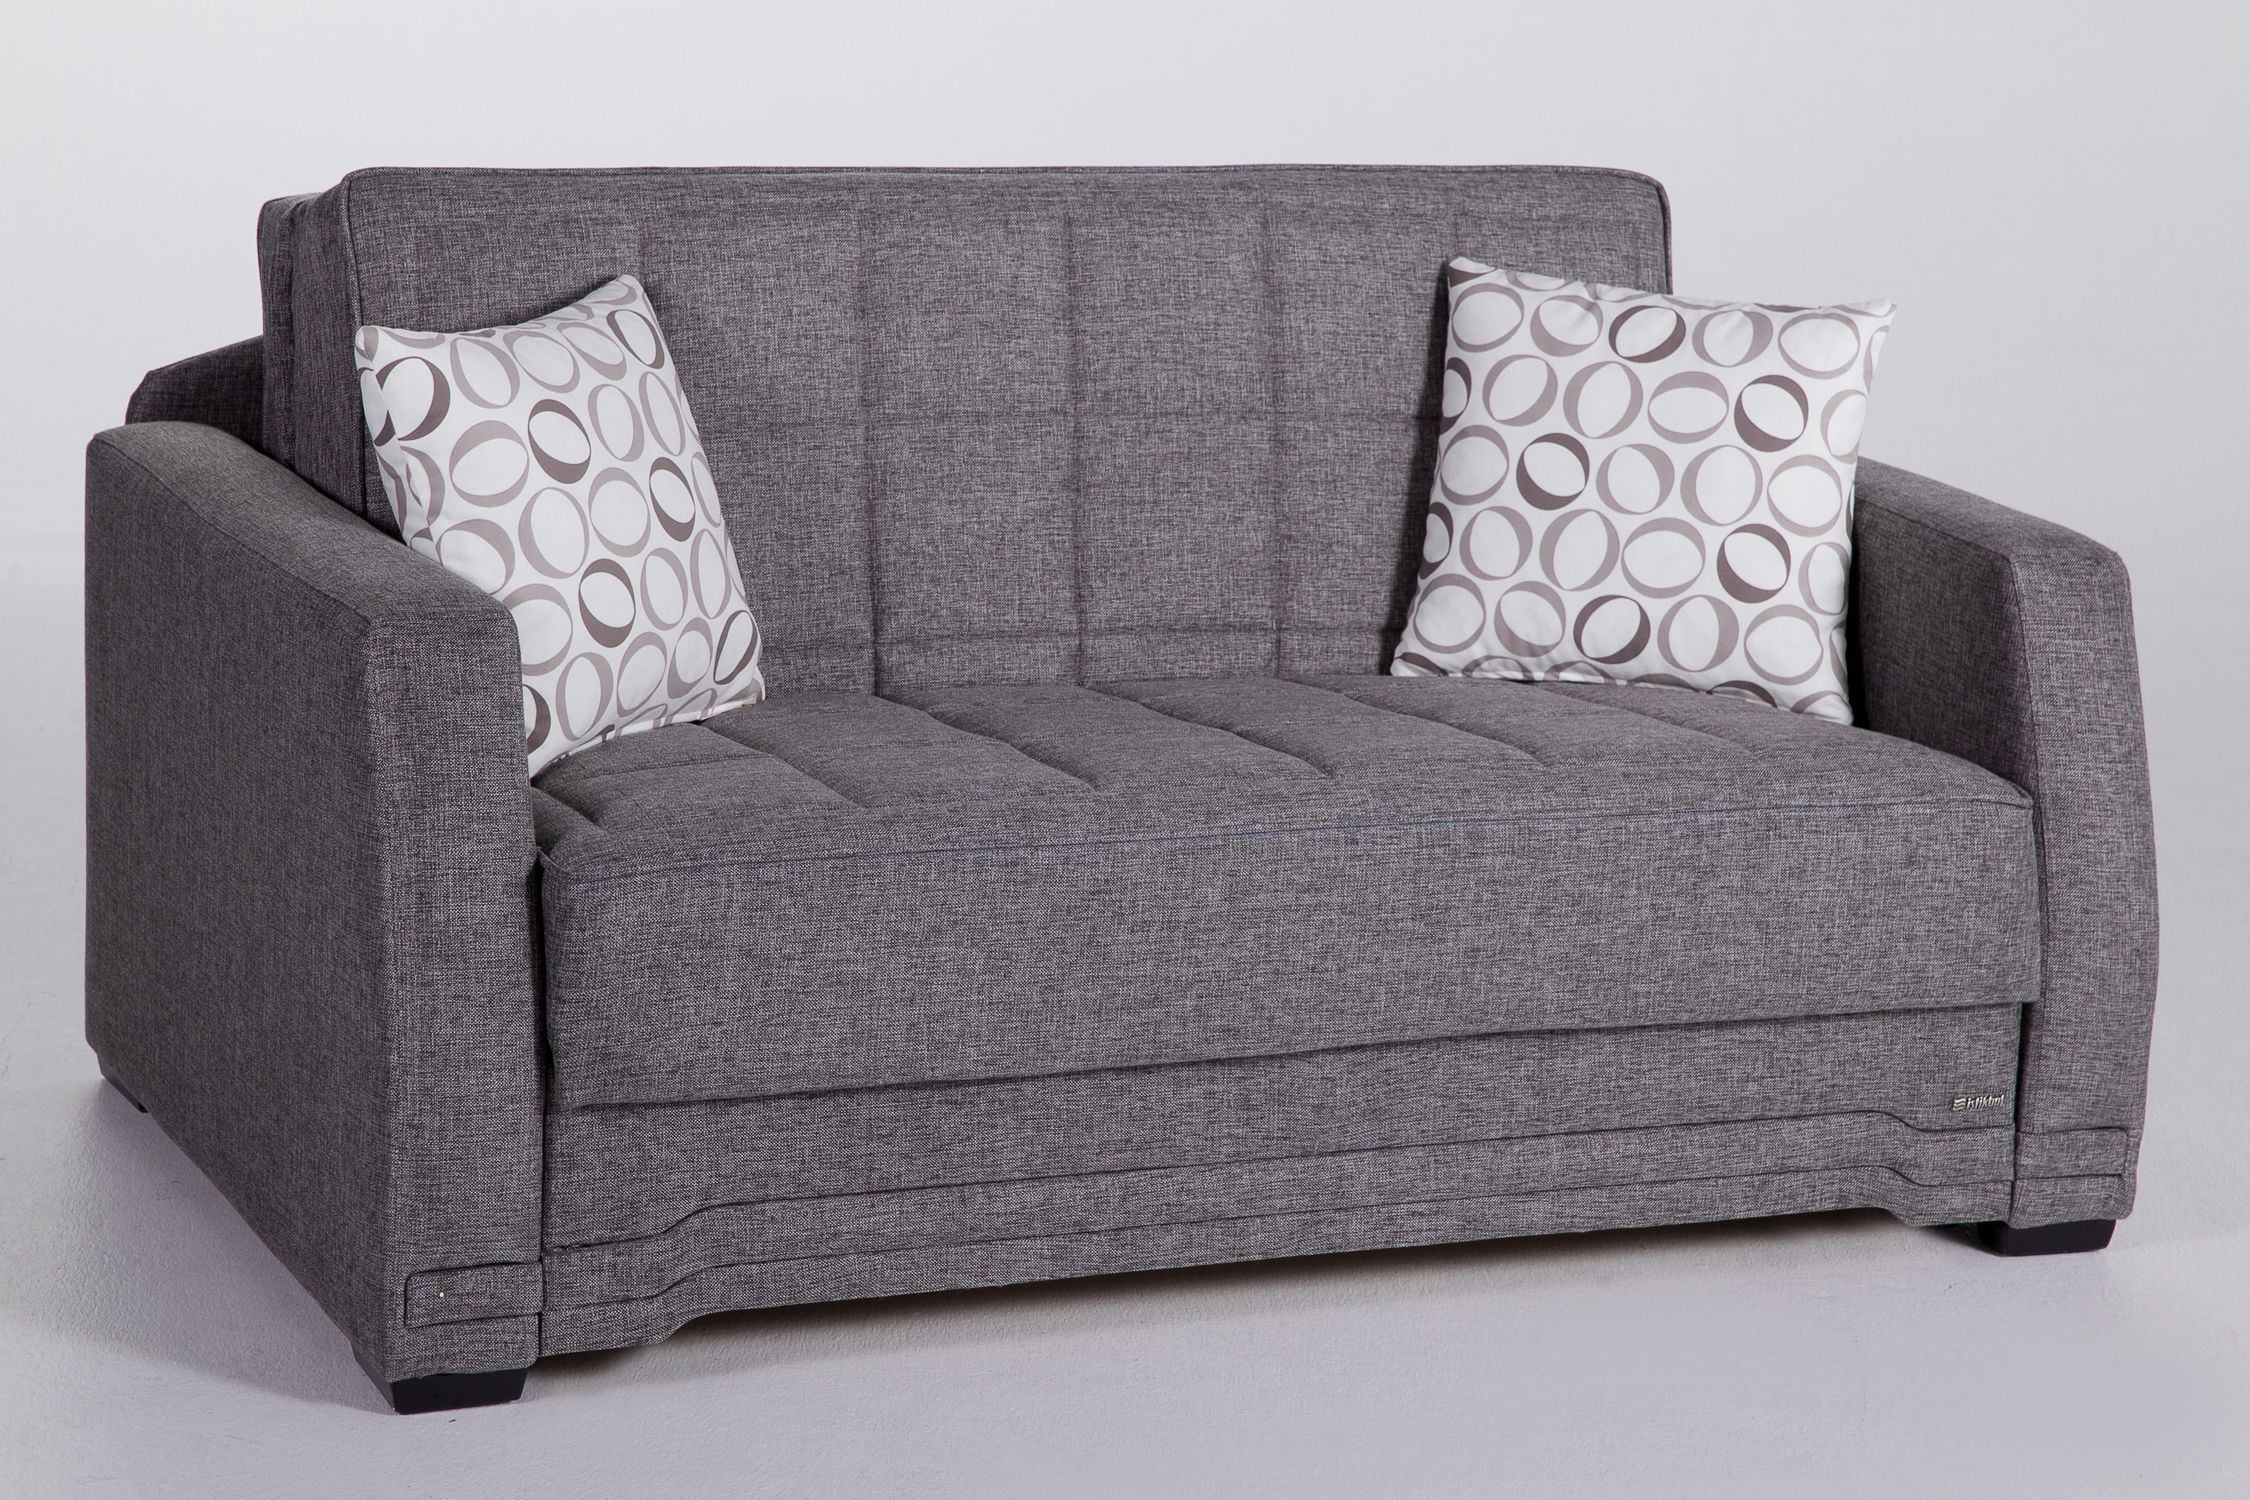 Valerie Diego Gray Loveseat Sleeperistikbal Furniture | Love Seat Intended For 3 In 1 Gray Pull Out Sleeper Sofas (Gallery 17 of 20)